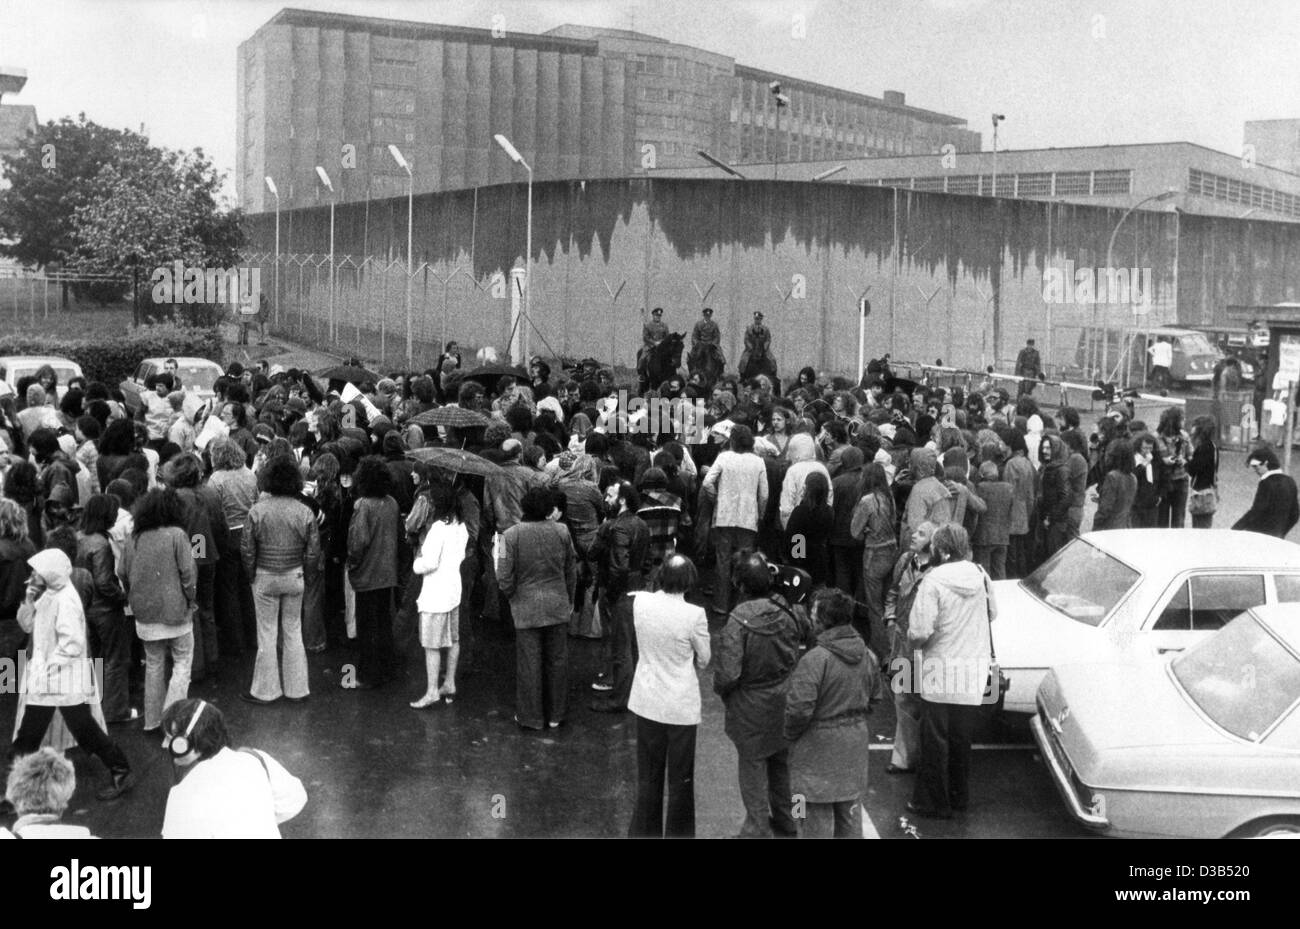 (dpa files) - About 250 demonstrators block the streets in front of the prison and court building after the death of Ulrike Meinhof, a journalist and a terrorist of the terrorist group RAF (Rote Armee Fraktion/Red Army Fraction), in Stuttgart-Stammheim, West Germany, 11 May 1976. In the background t Stock Photo